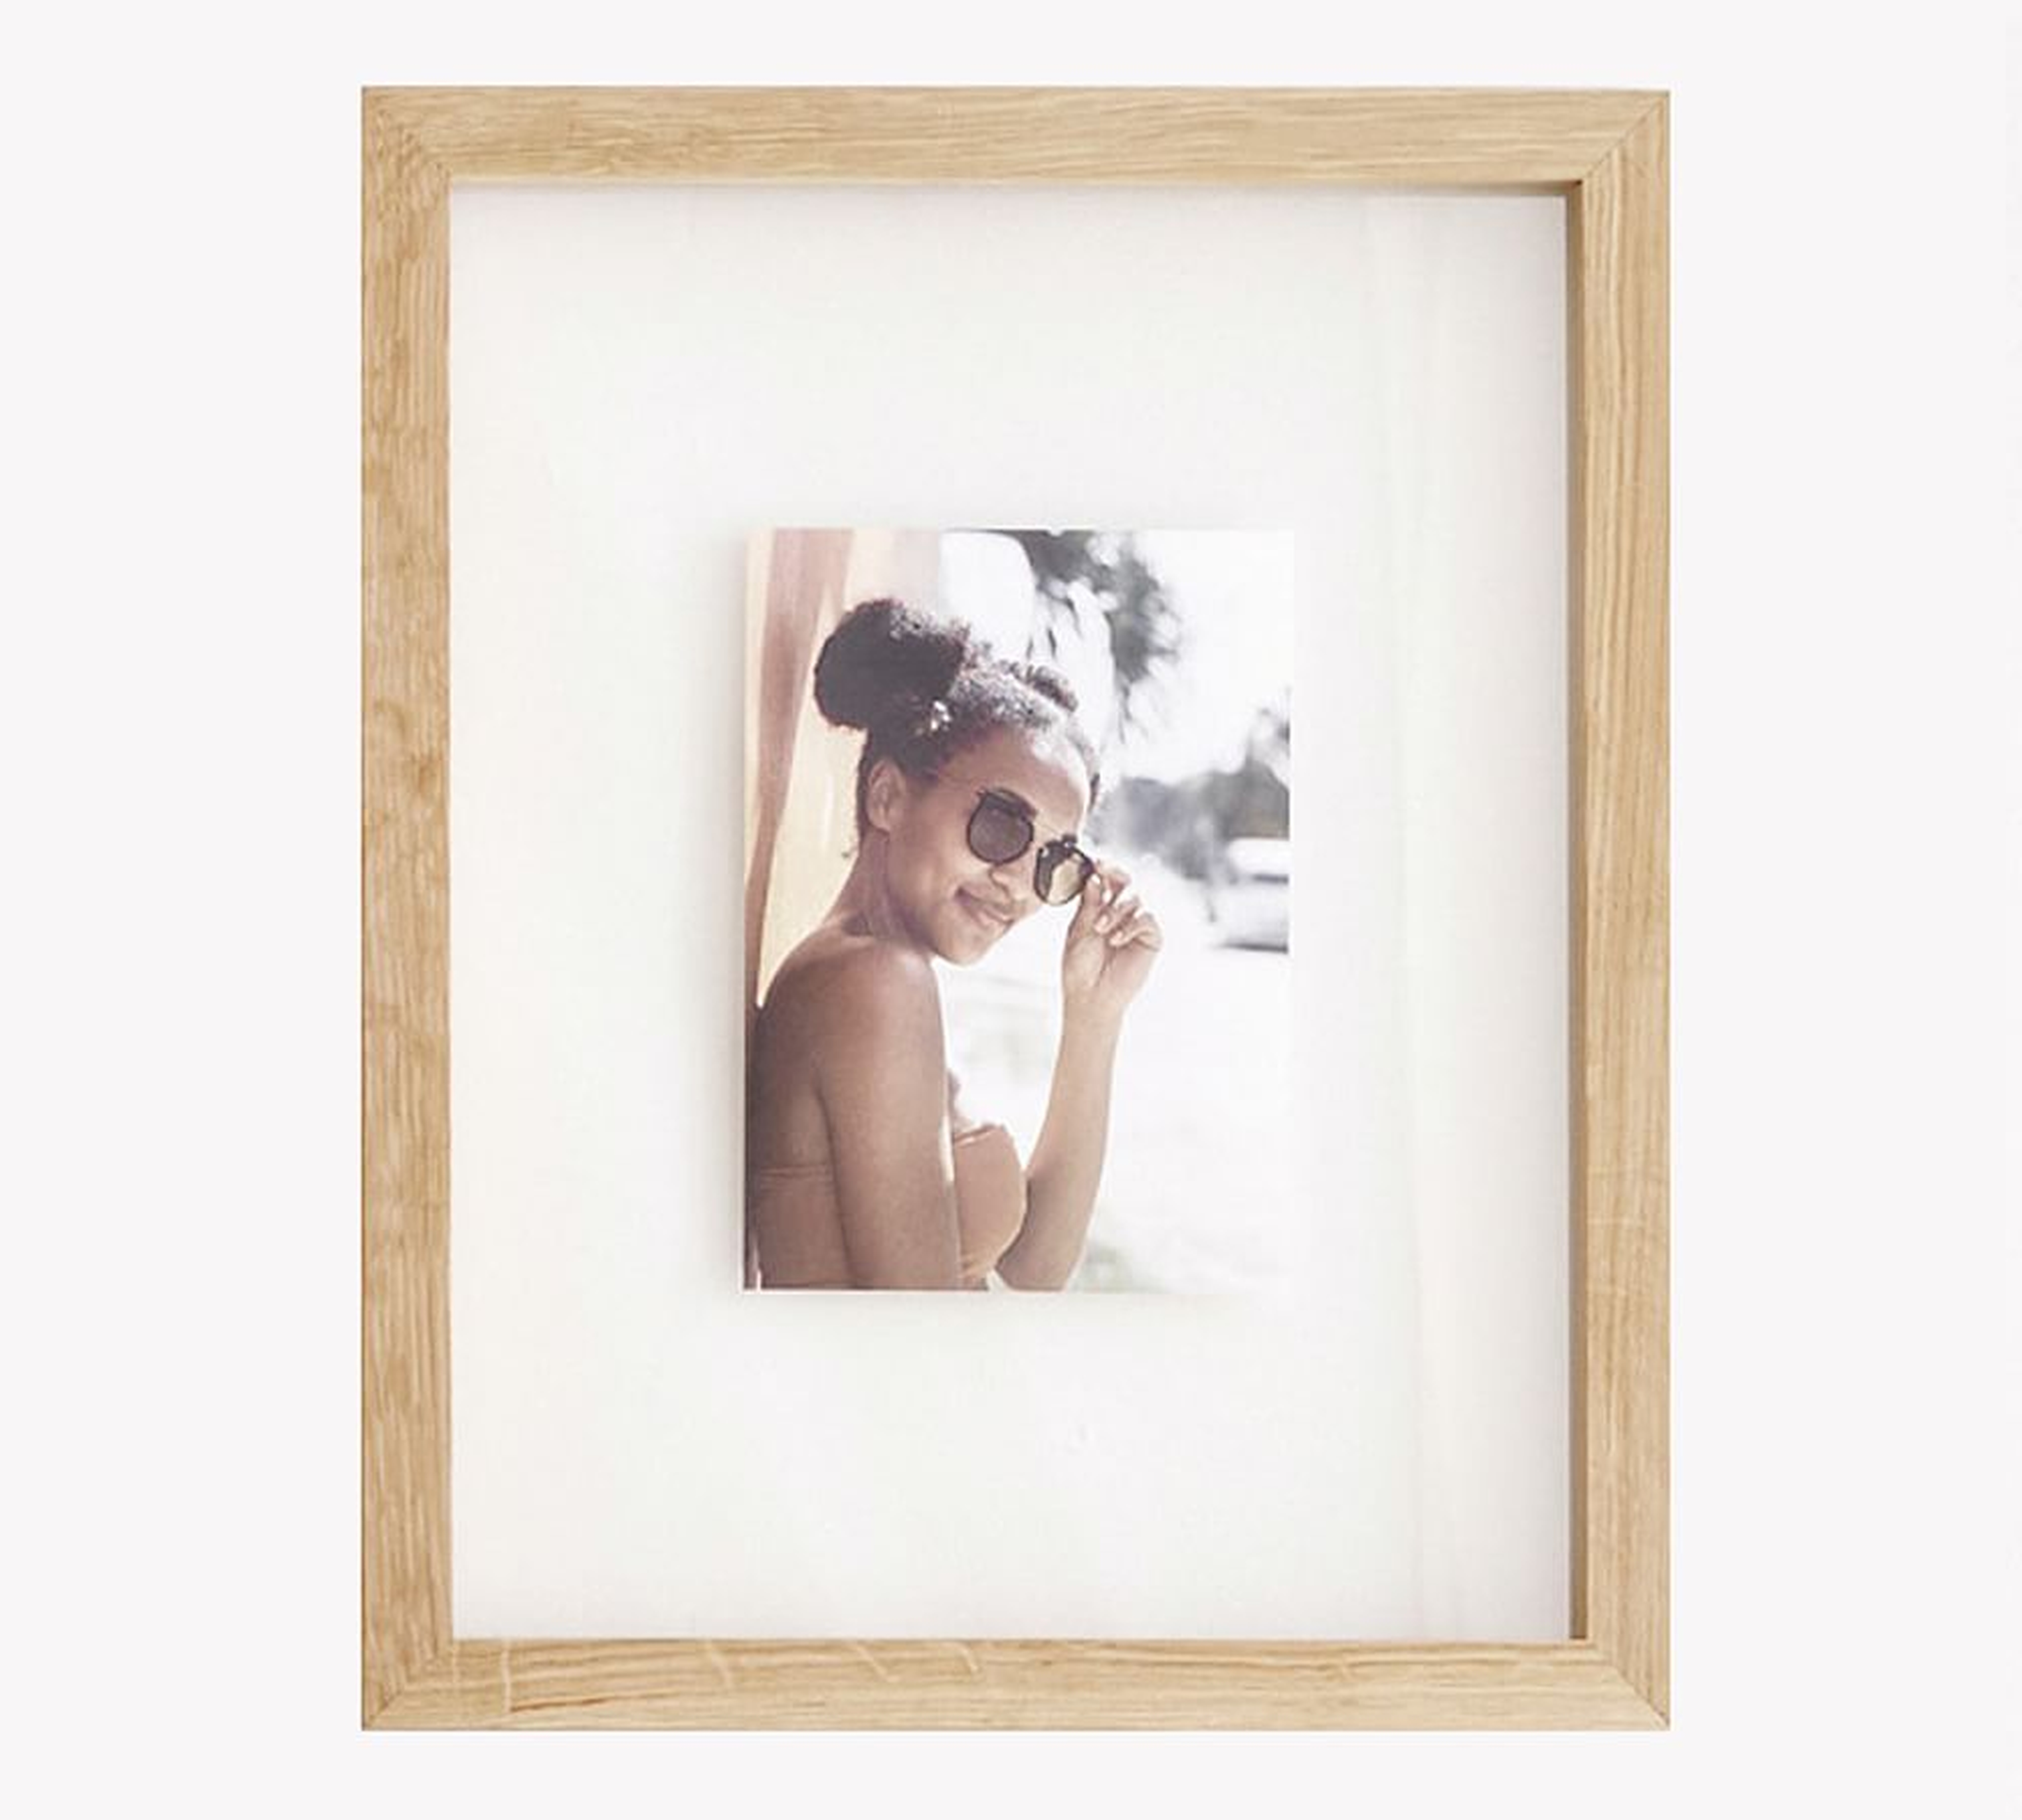 Floating Wood Gallery Frame, 11x14 (12x15 overall) - Natural - Pottery Barn